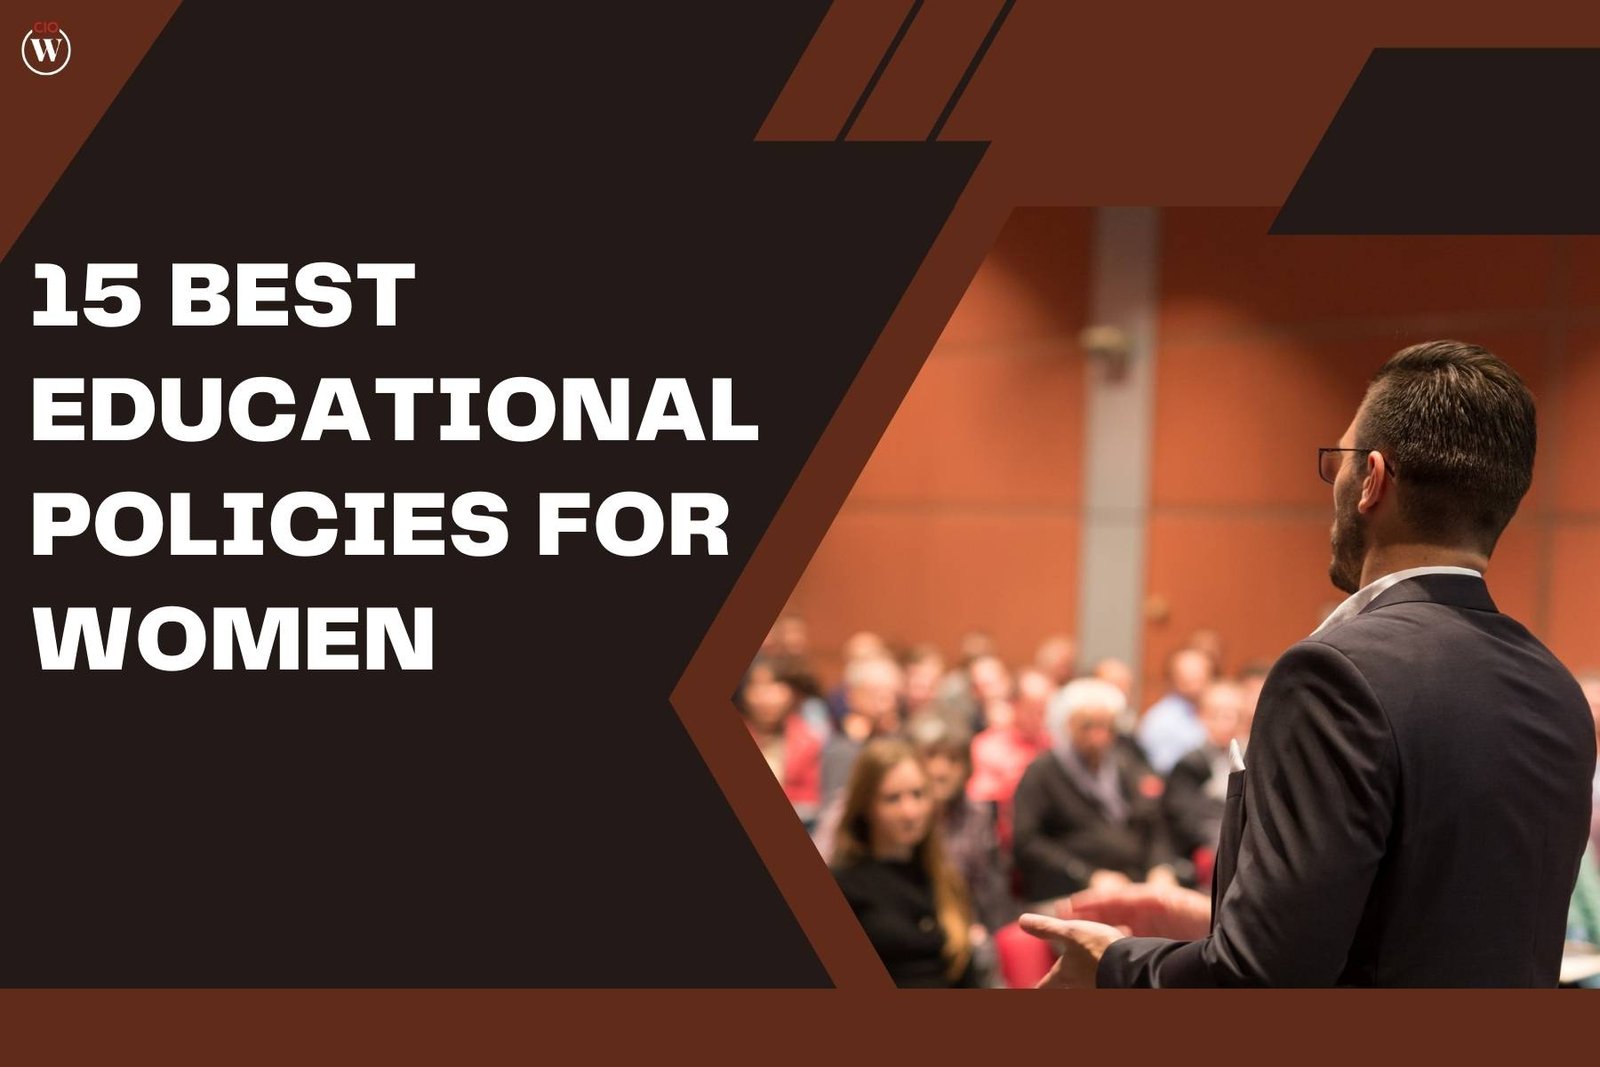 15 Best educational policies for women you should know | CIO Women Magazine